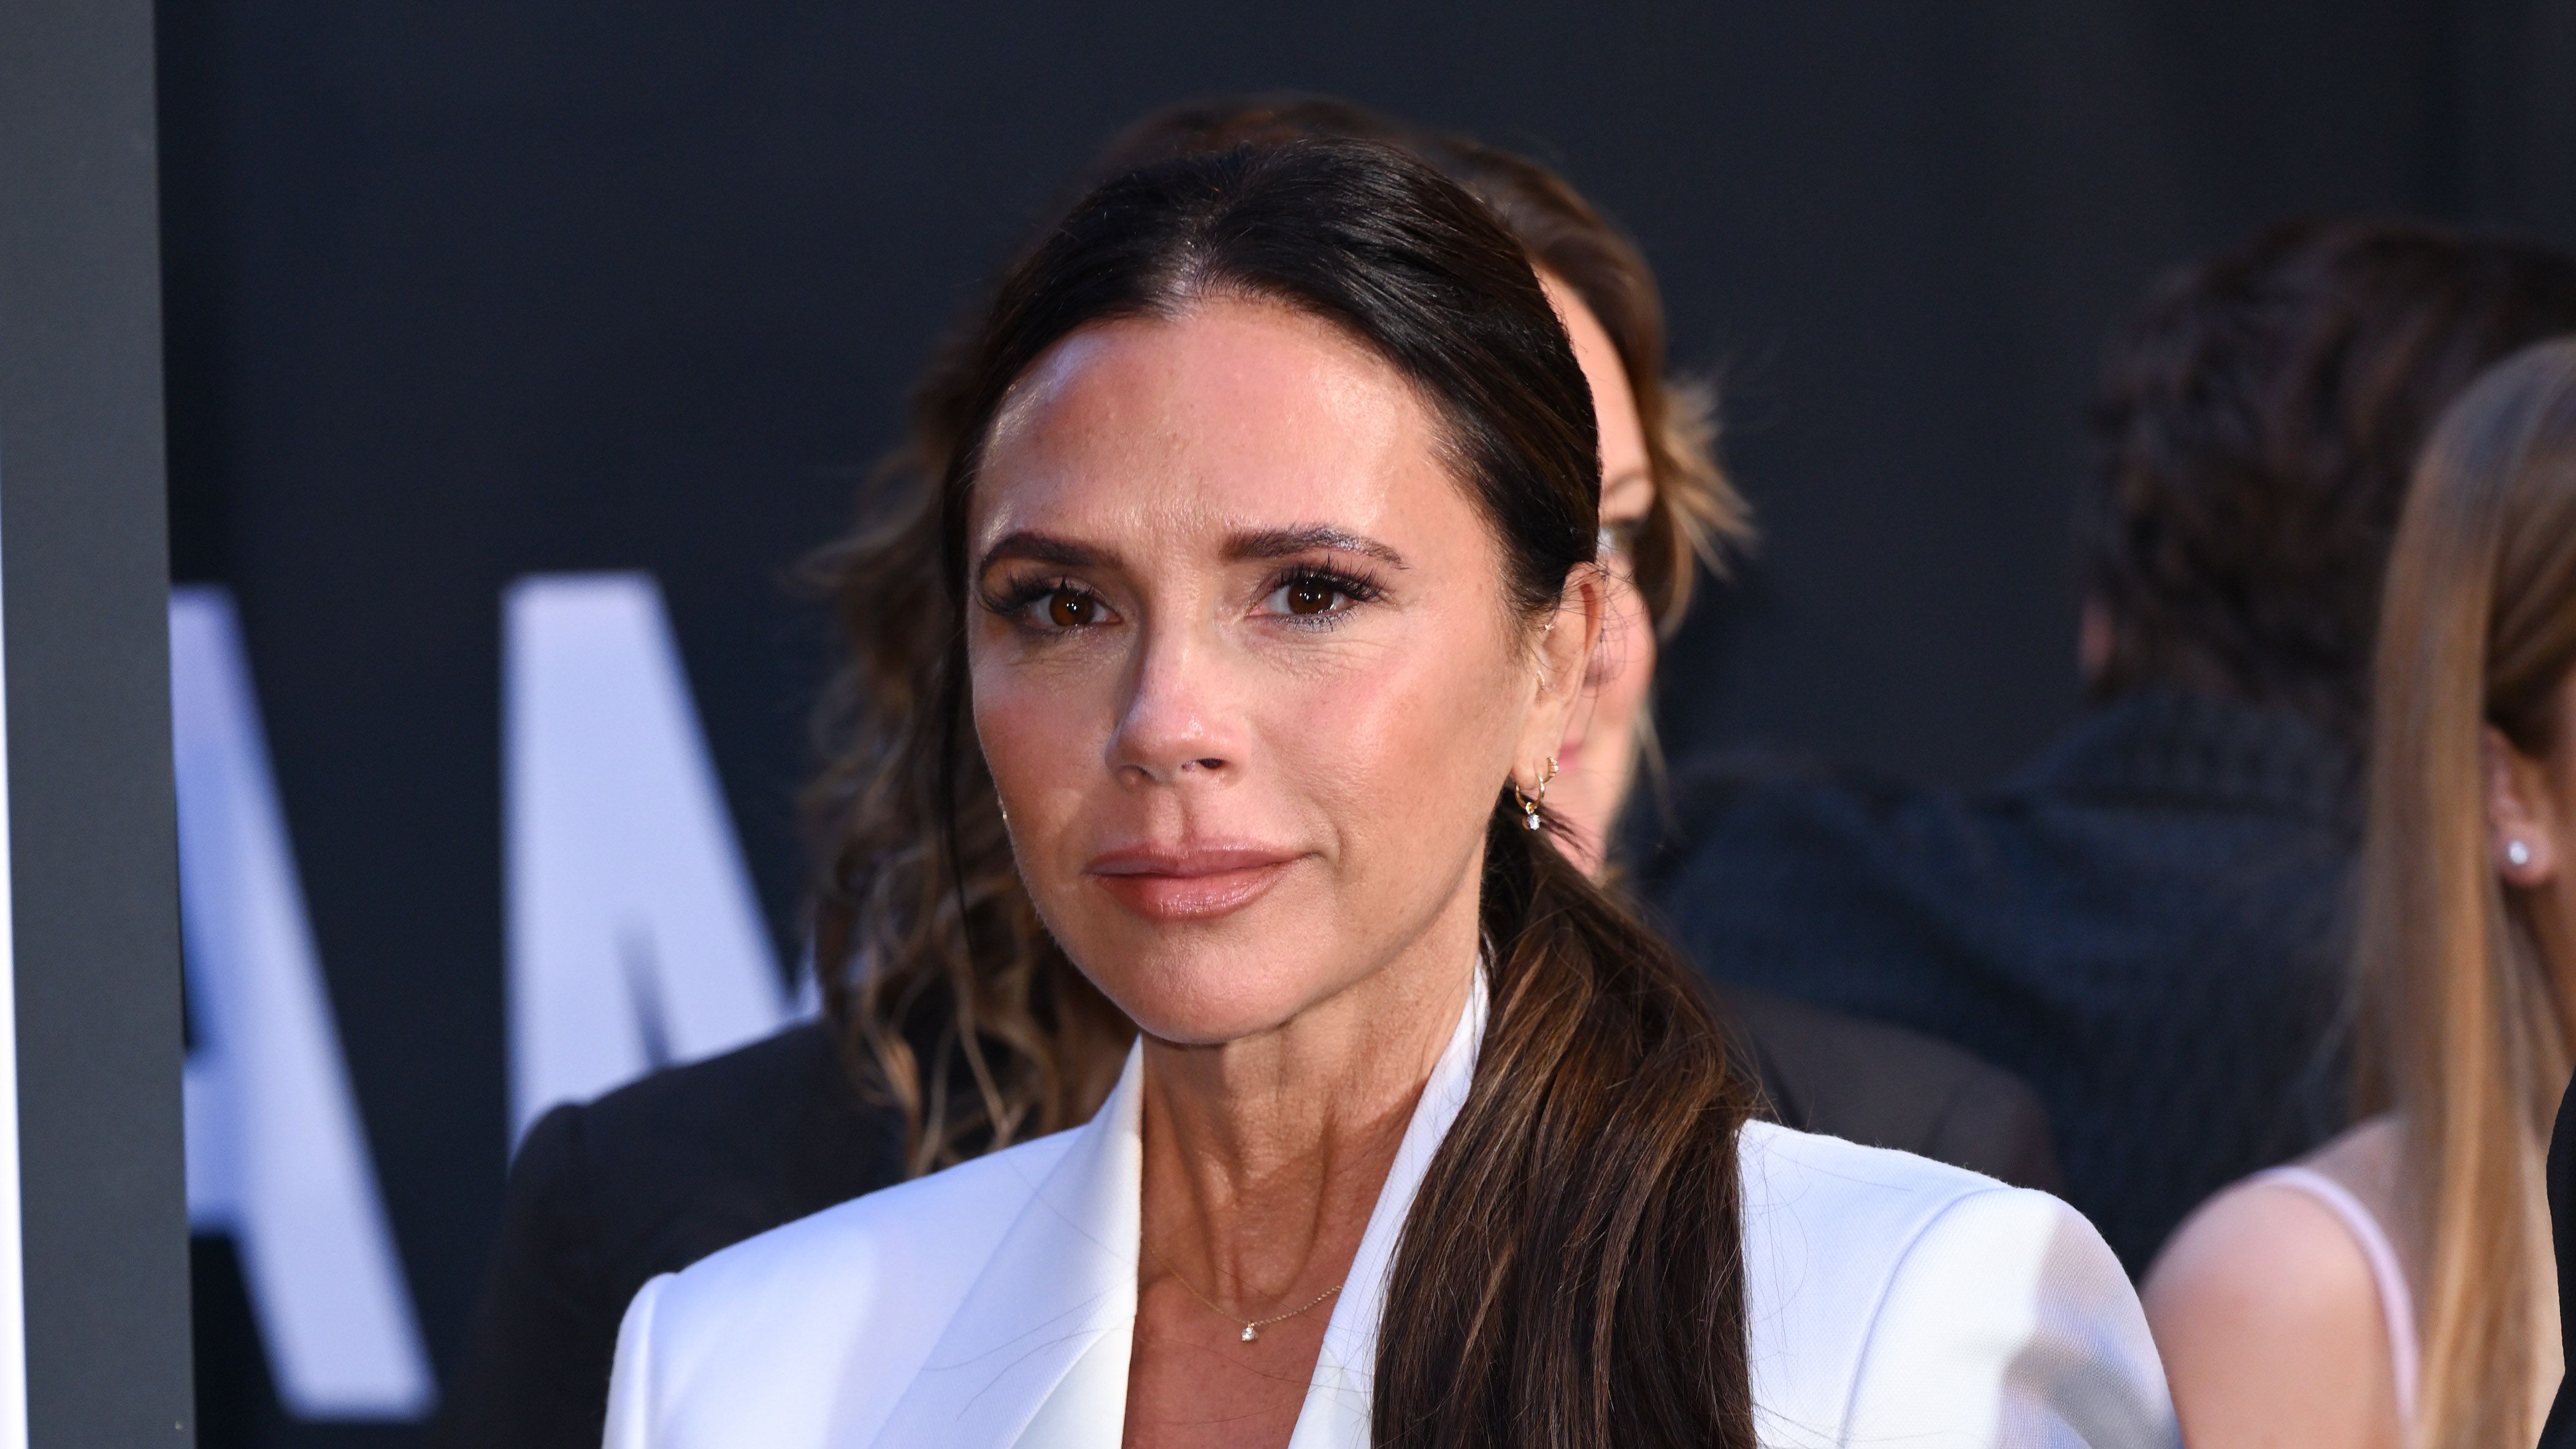 https://hips.hearstapps.com/hmg-prod/images/why-do-celebrities-like-victoria-beckham-pretend-they-re-working-class-6523dd4870ce4.jpg?crop=1xw:0.375xh;center,top